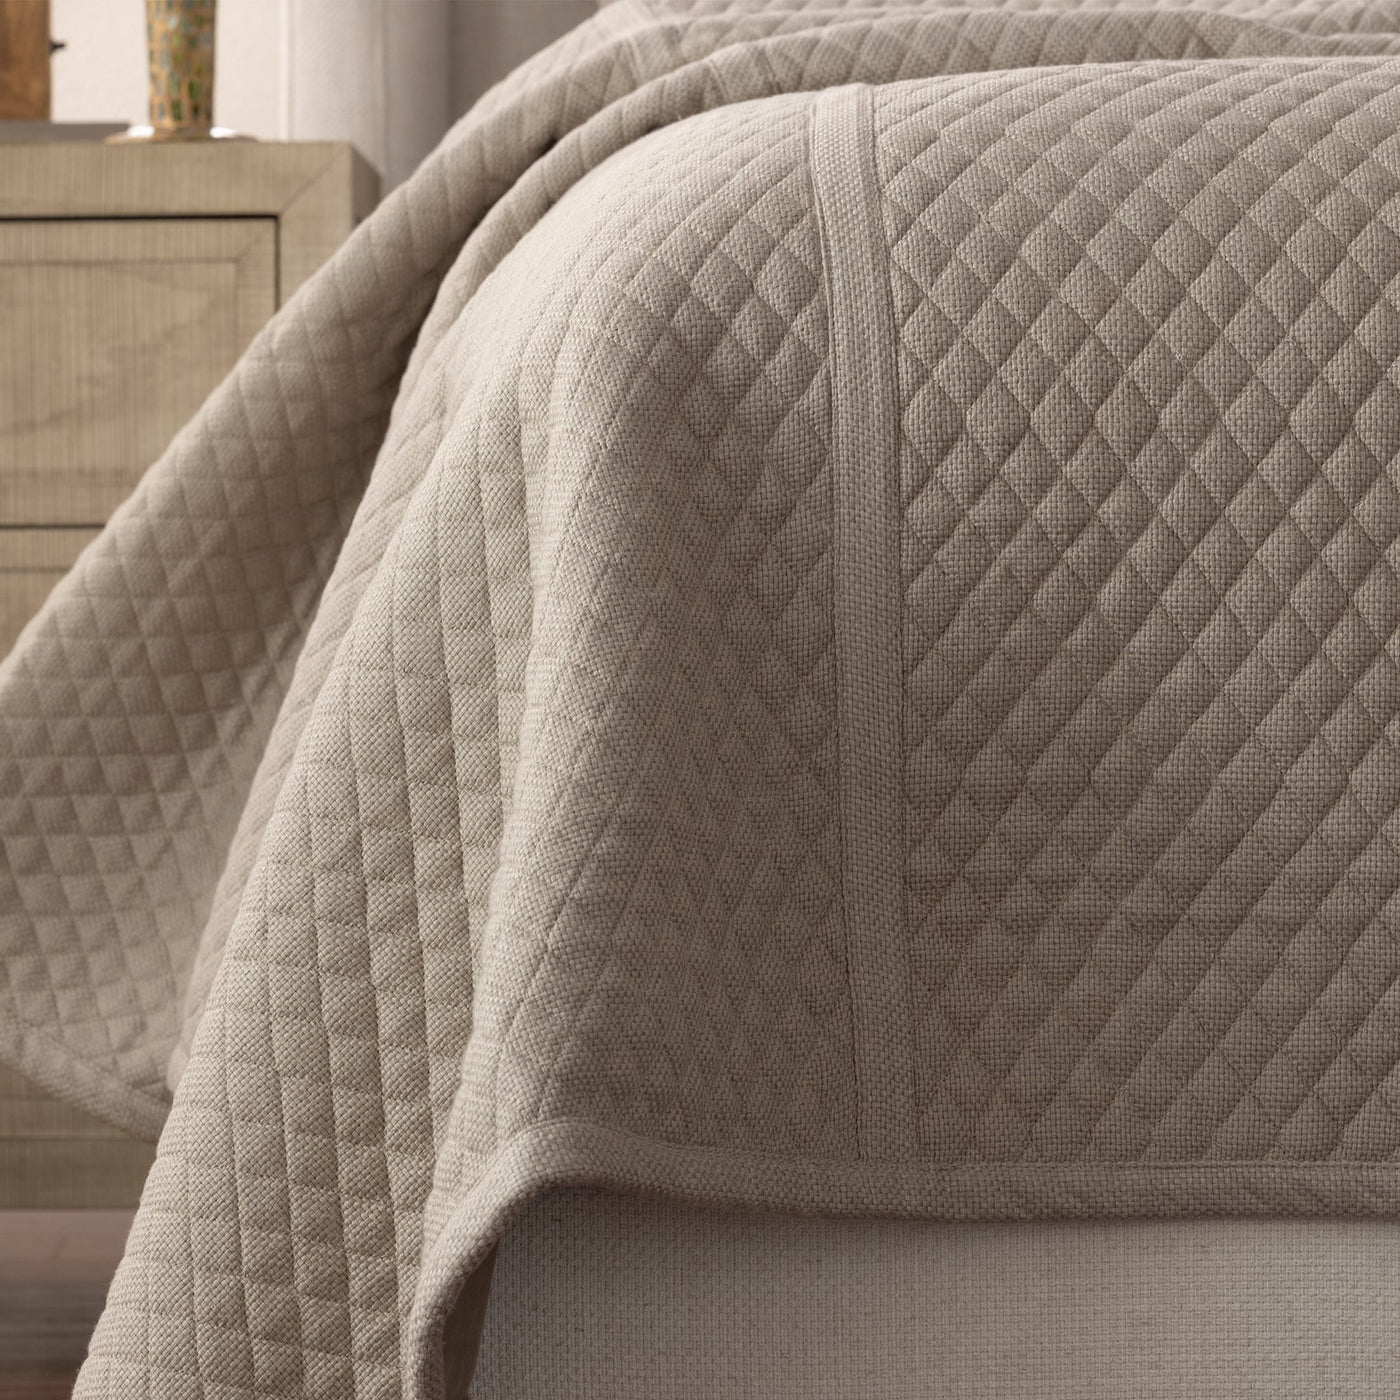 Laurie Quilted Coverlet Stone Basketweave Queen 96X98